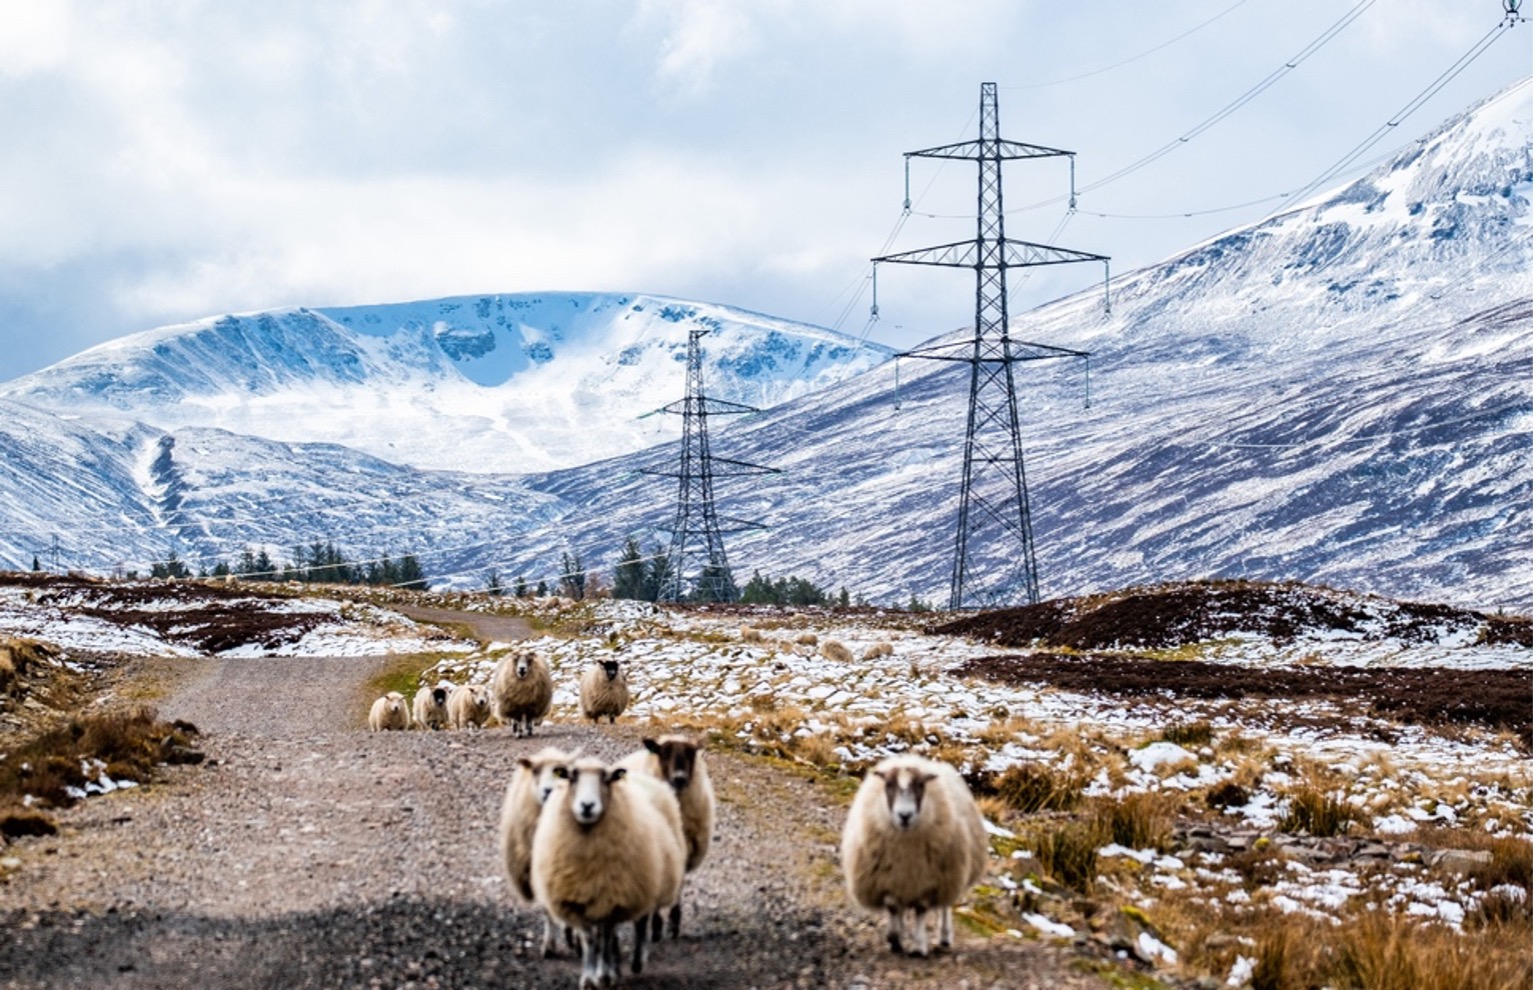 A flock of sheep can be seen roaming freely in the snowy Scottish highlands with transmission towers in the background.